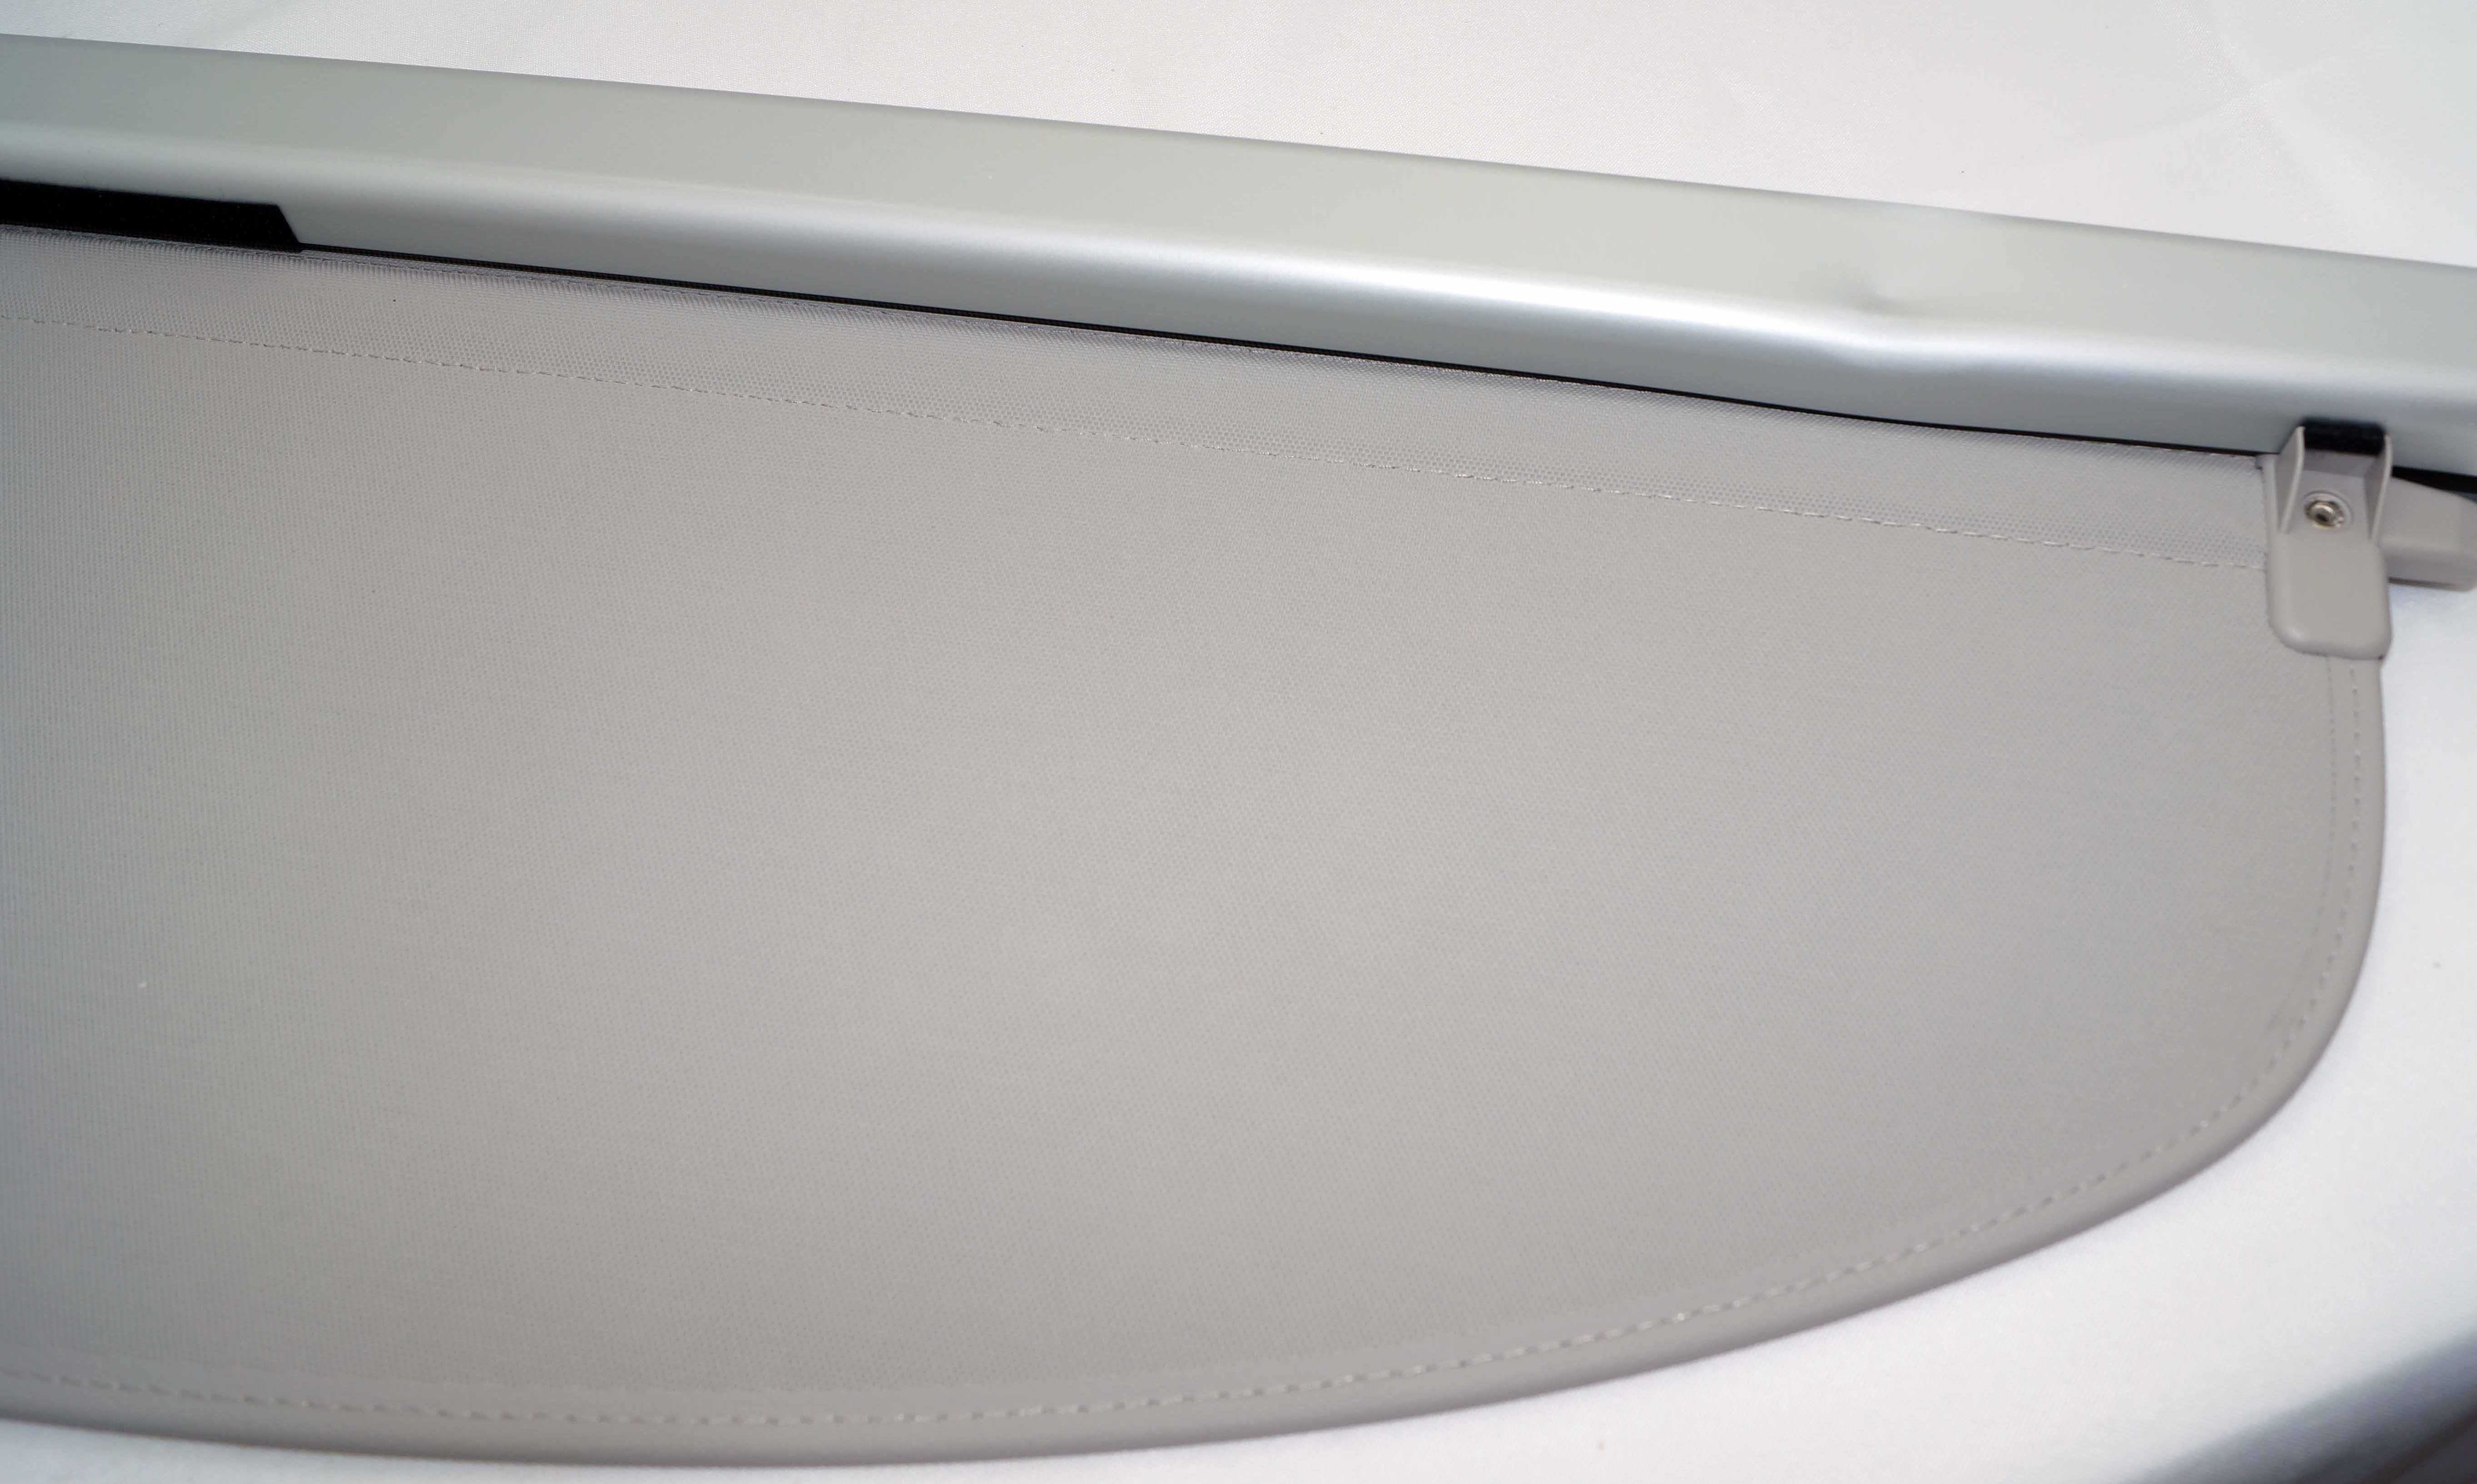 Genuine OEM 999N3G2003 Nissan Rear Retractable Cargo Area Cover Privacy Shade - image 7